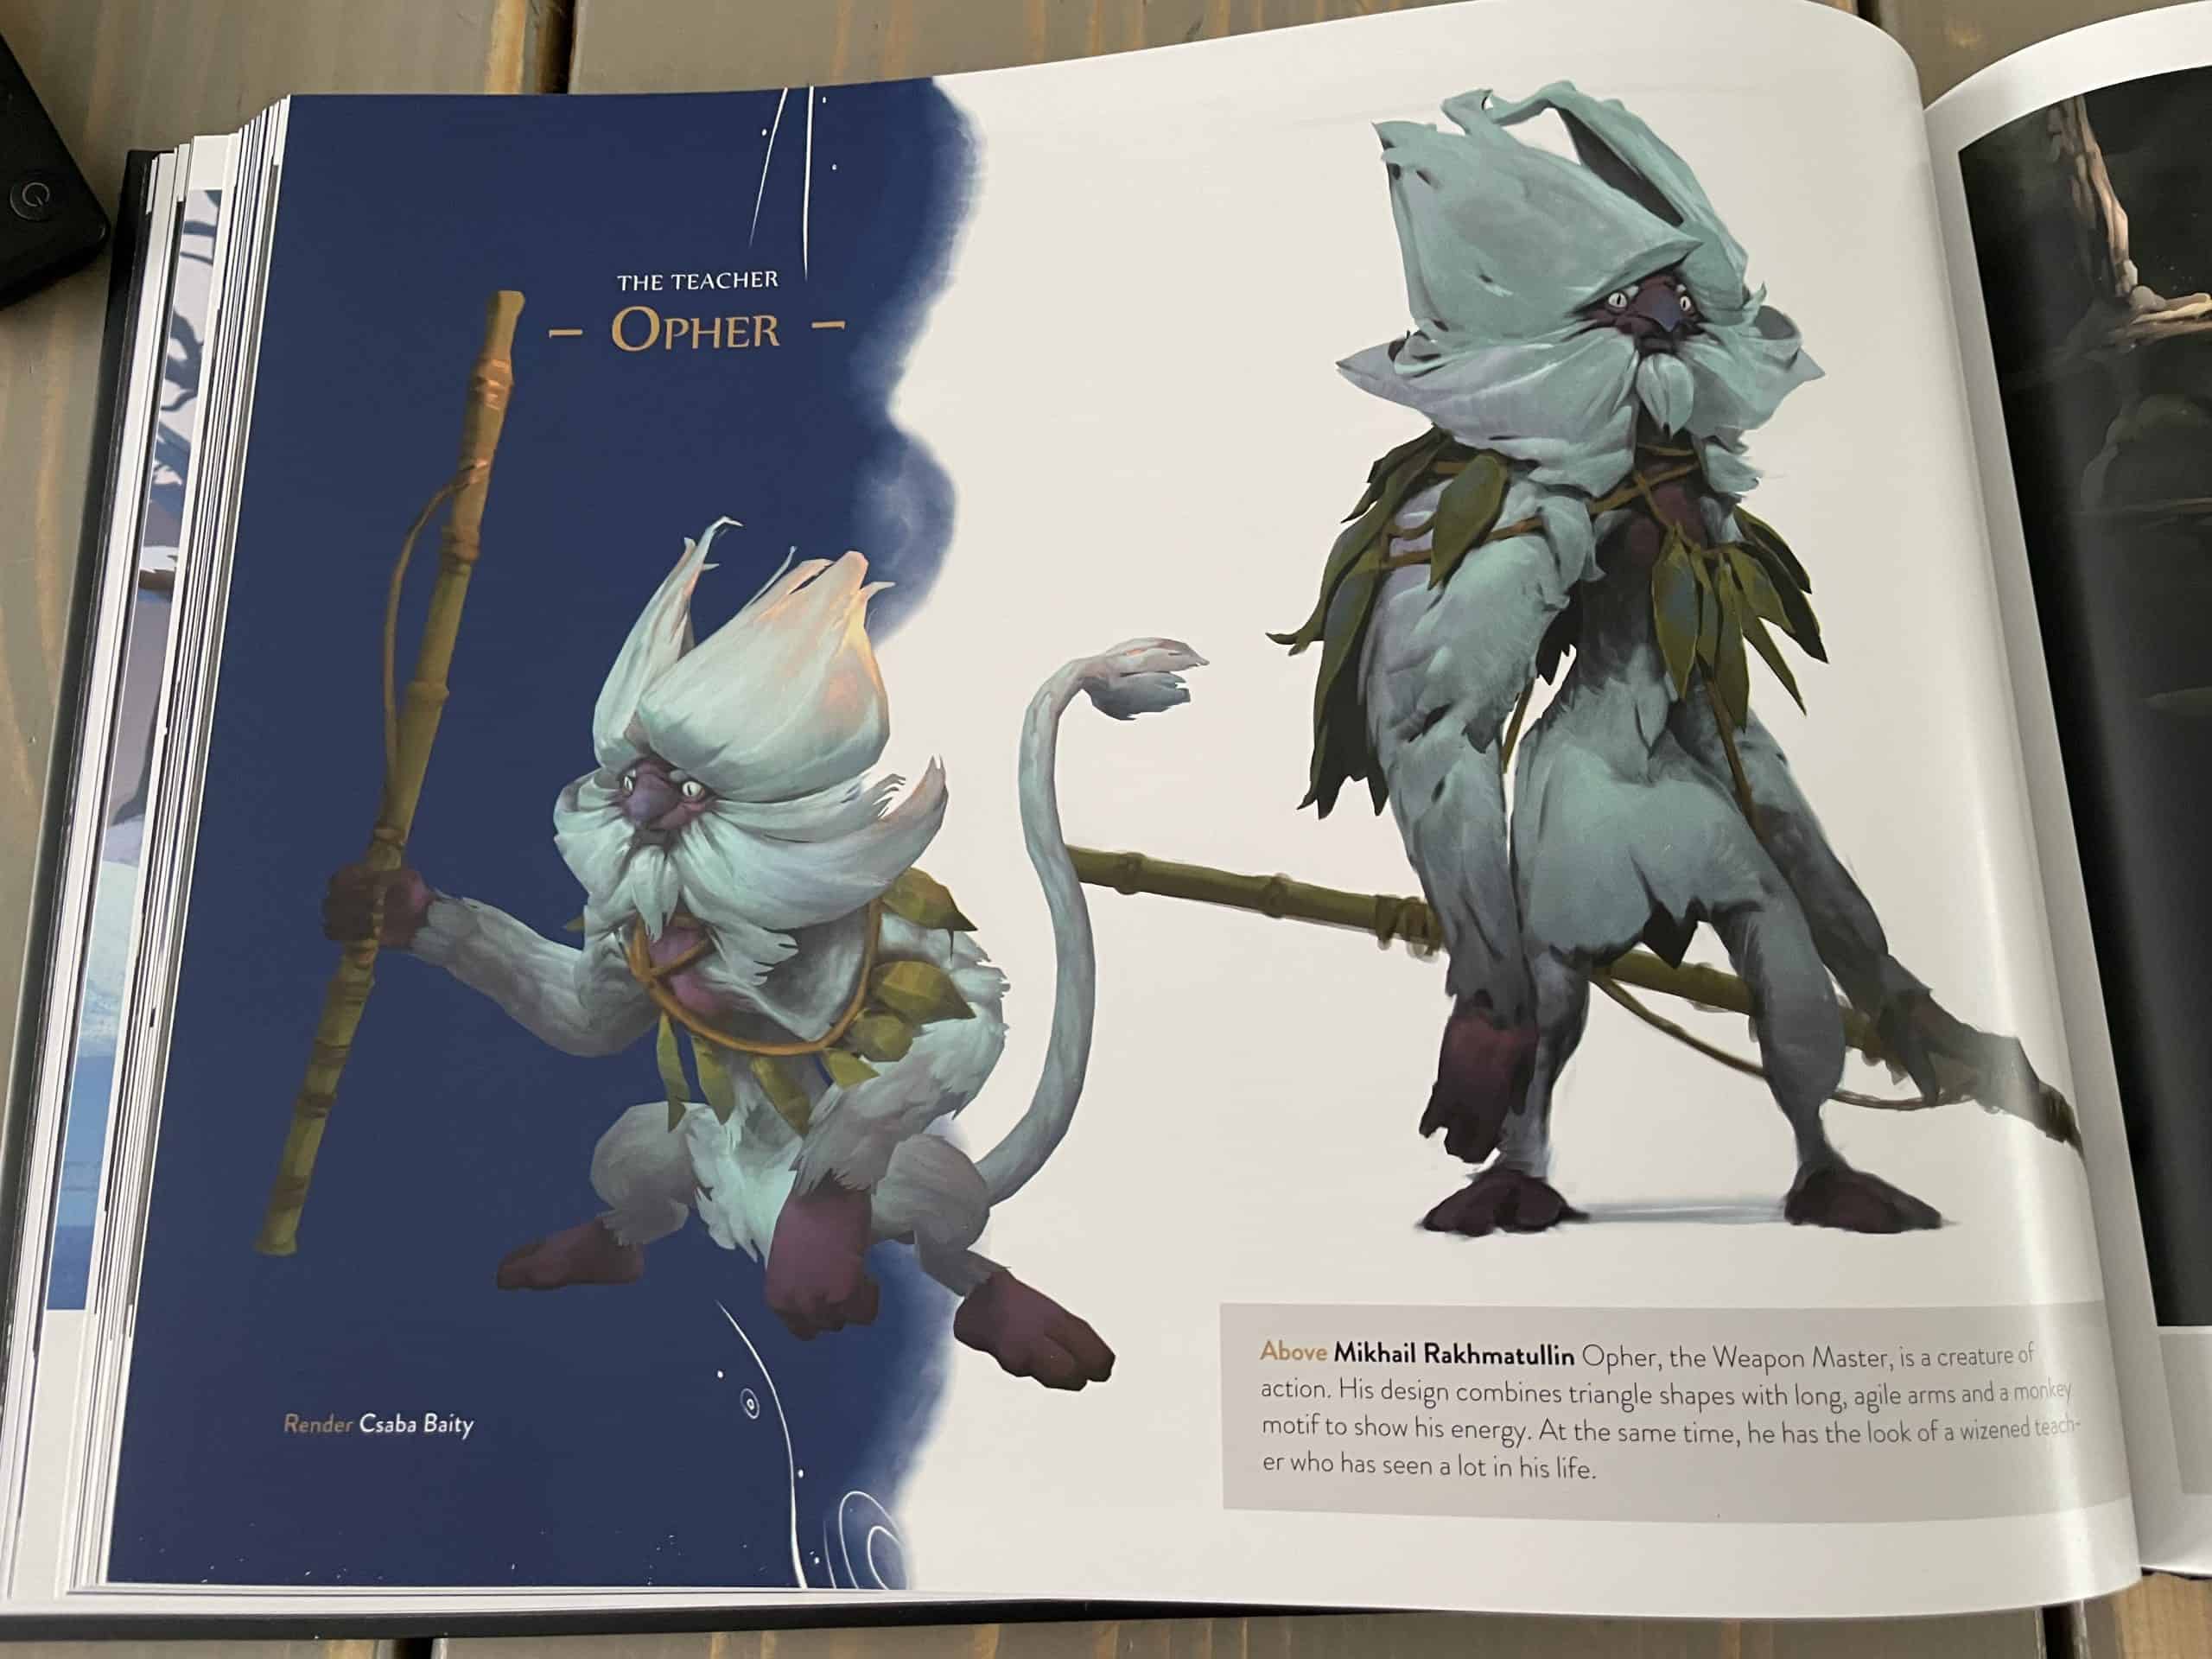 The Art of Ori and the Will of the Wisps